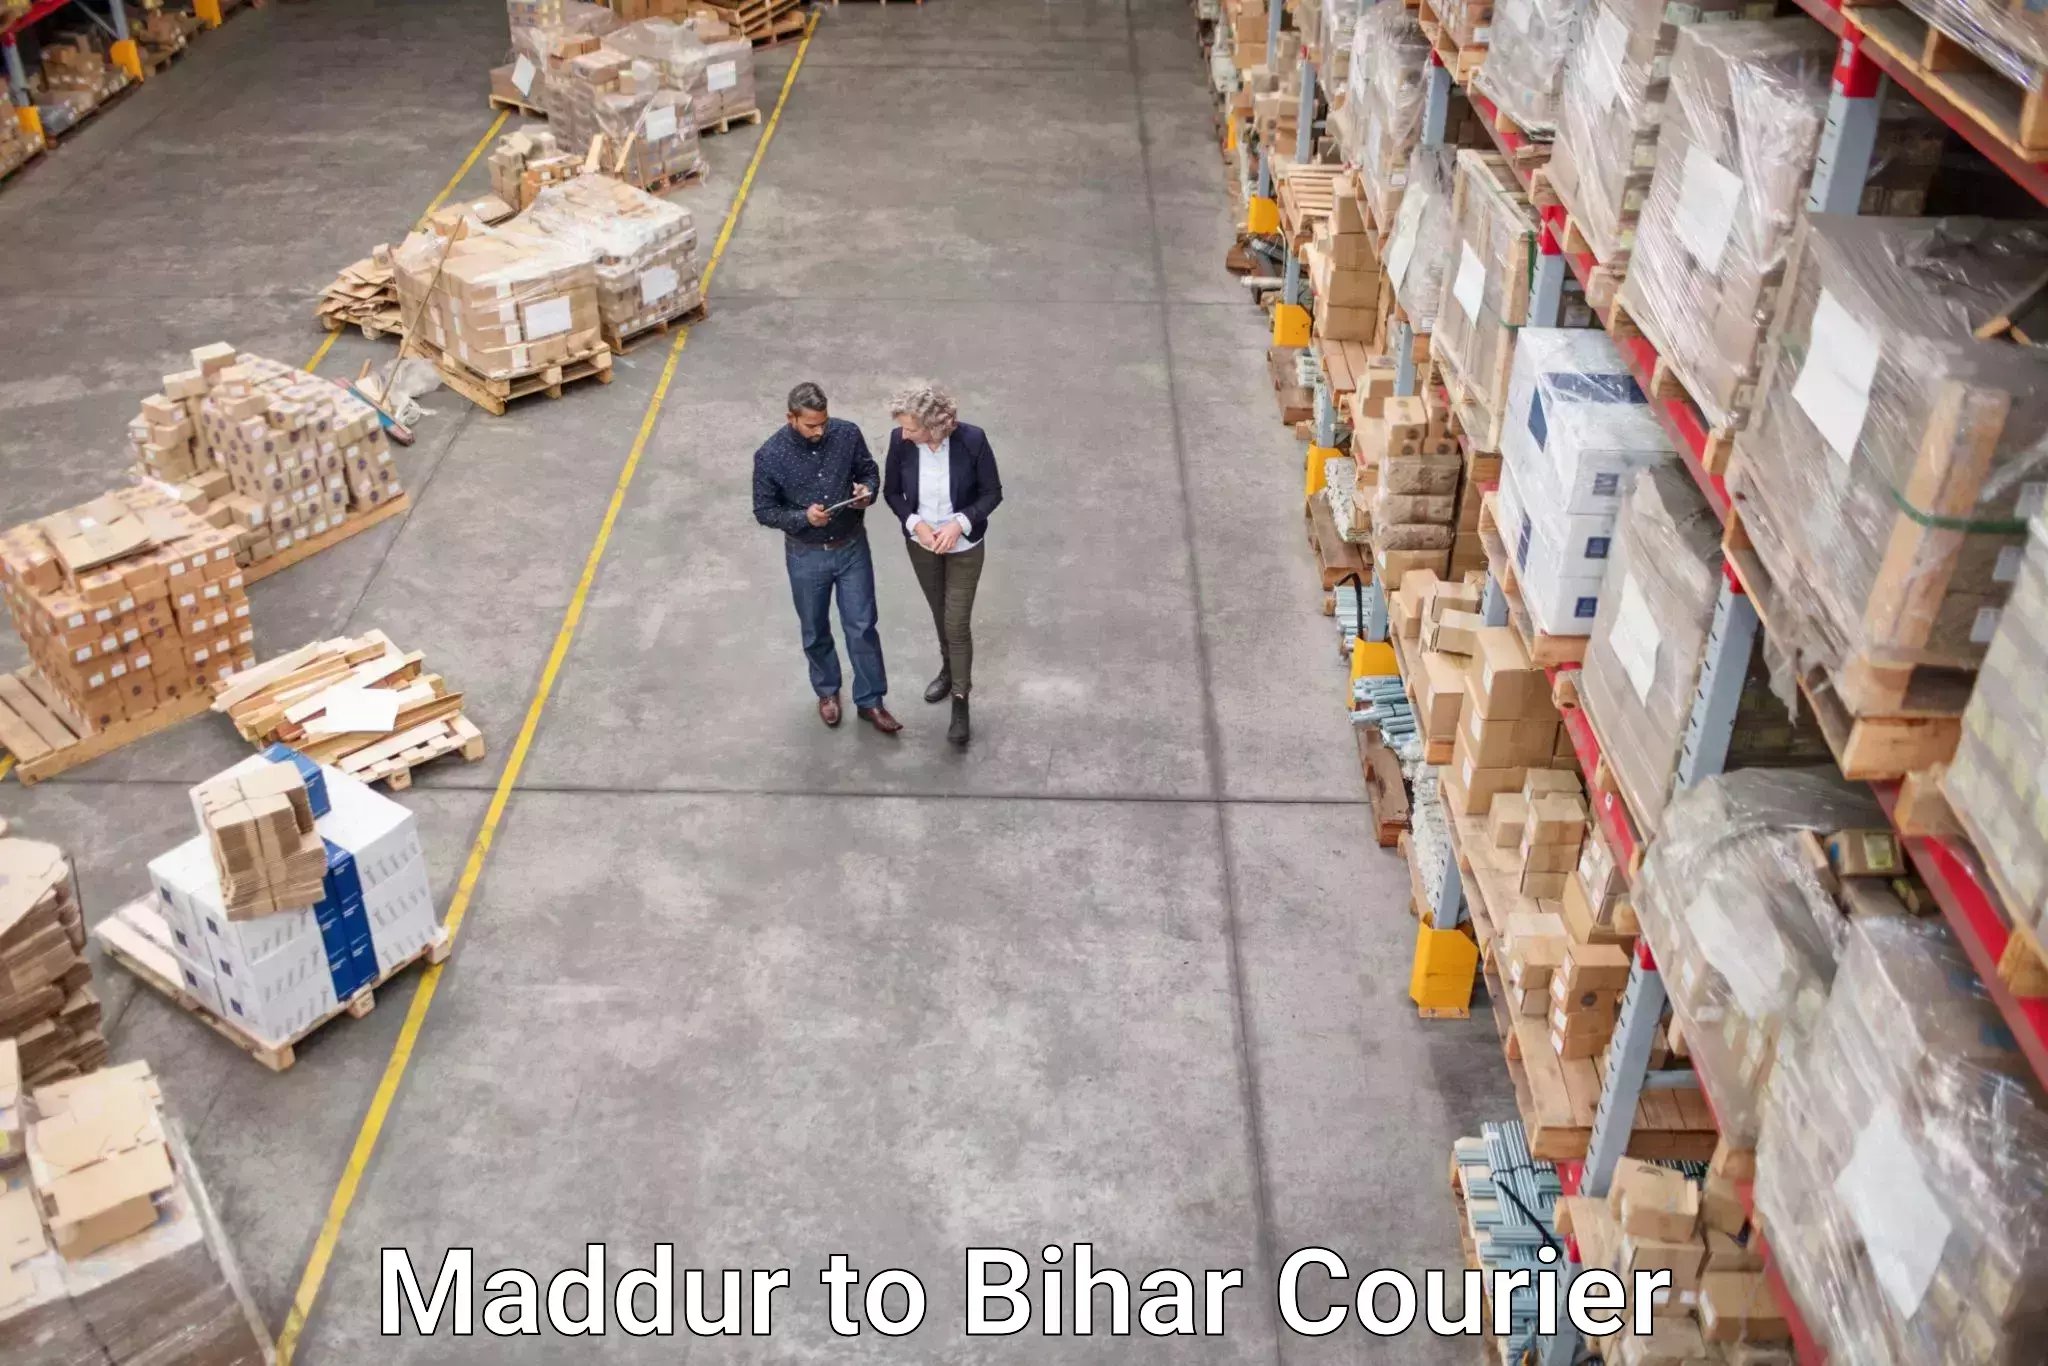 Reliable courier service Maddur to Bihar